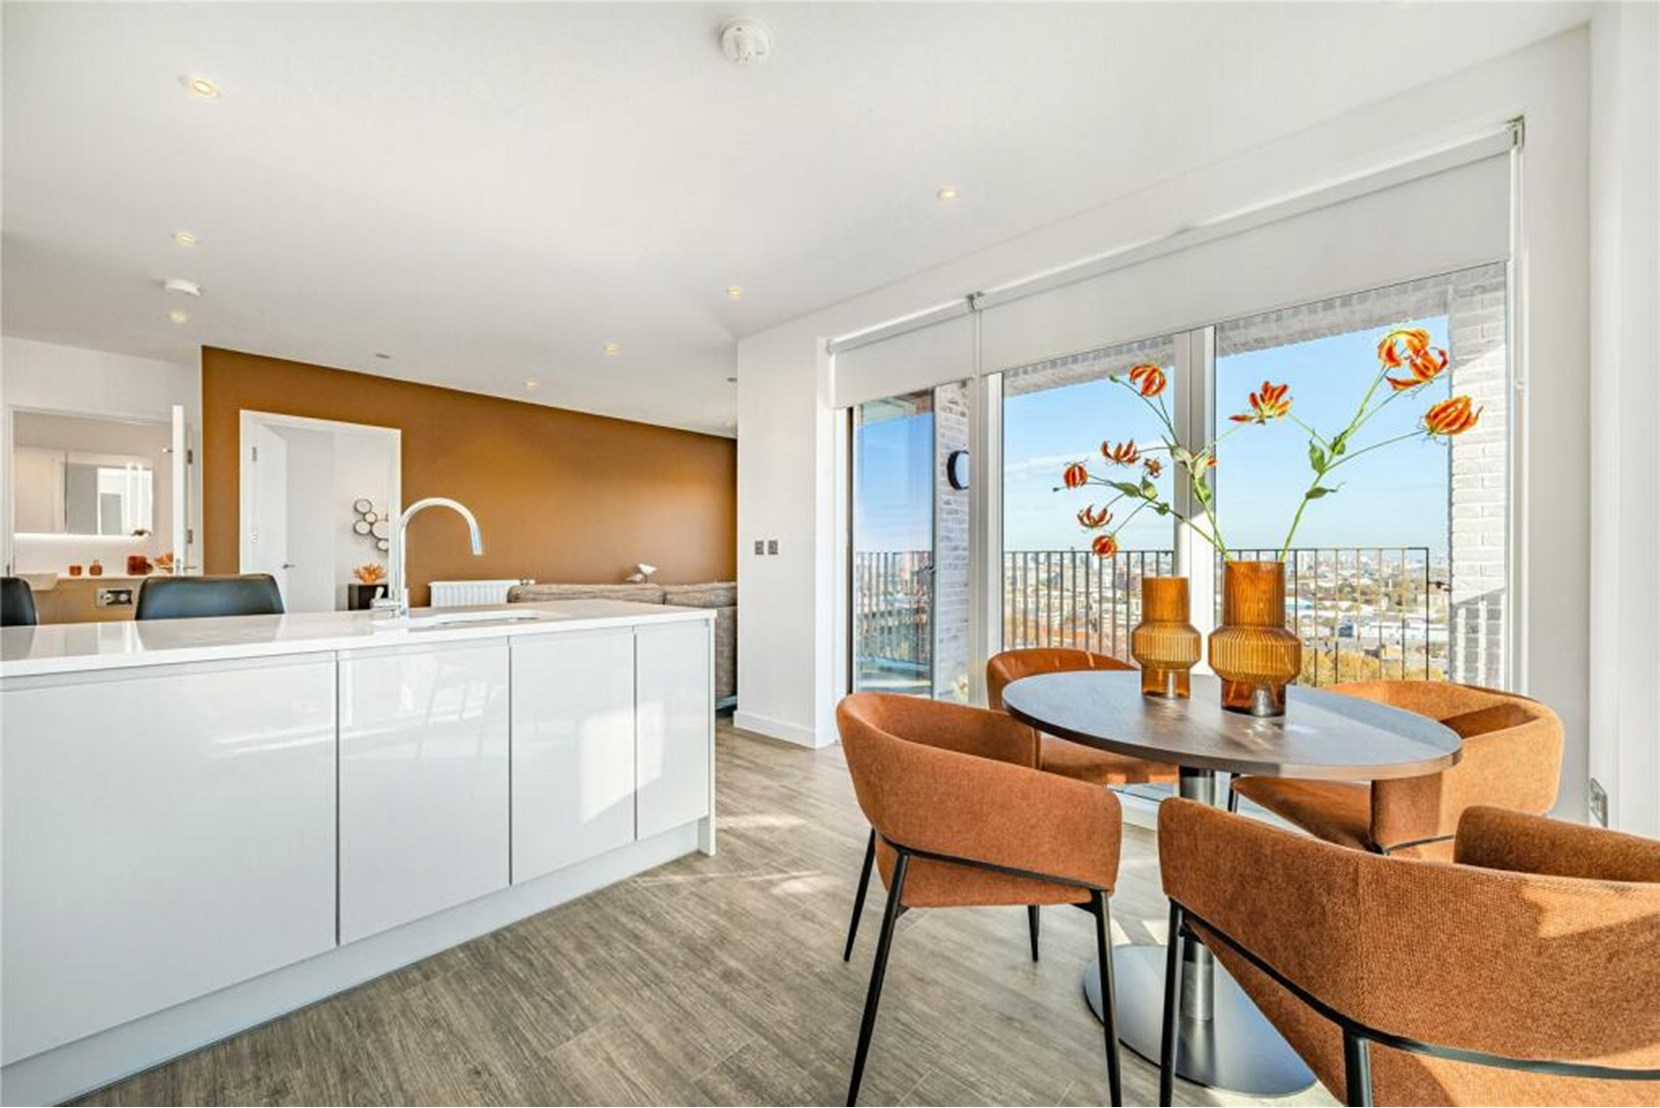 Apartments to Rent by Folio at Marson Place, Southwark, SE17, kitchen dining area